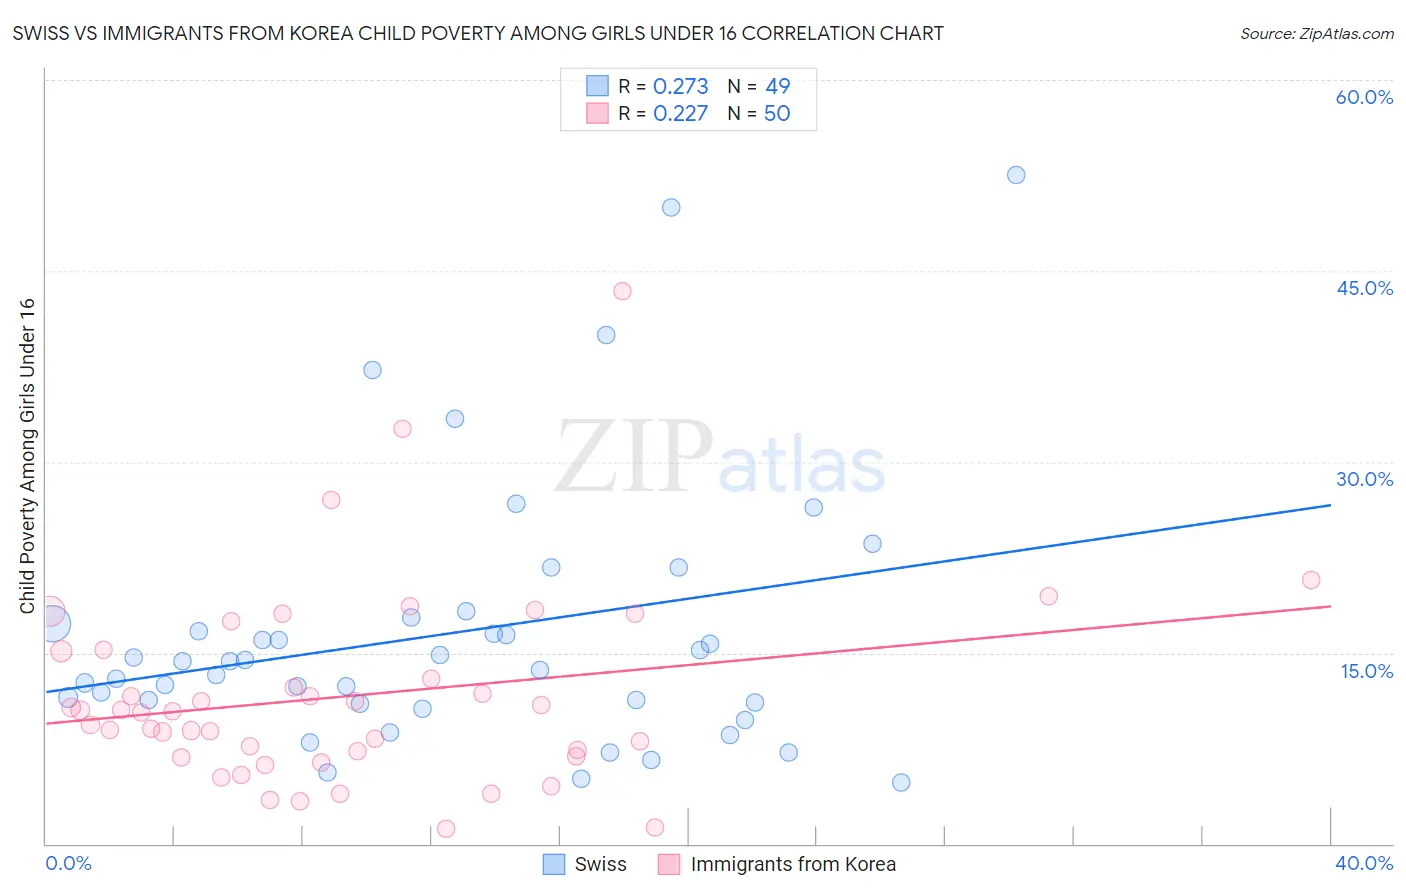 Swiss vs Immigrants from Korea Child Poverty Among Girls Under 16